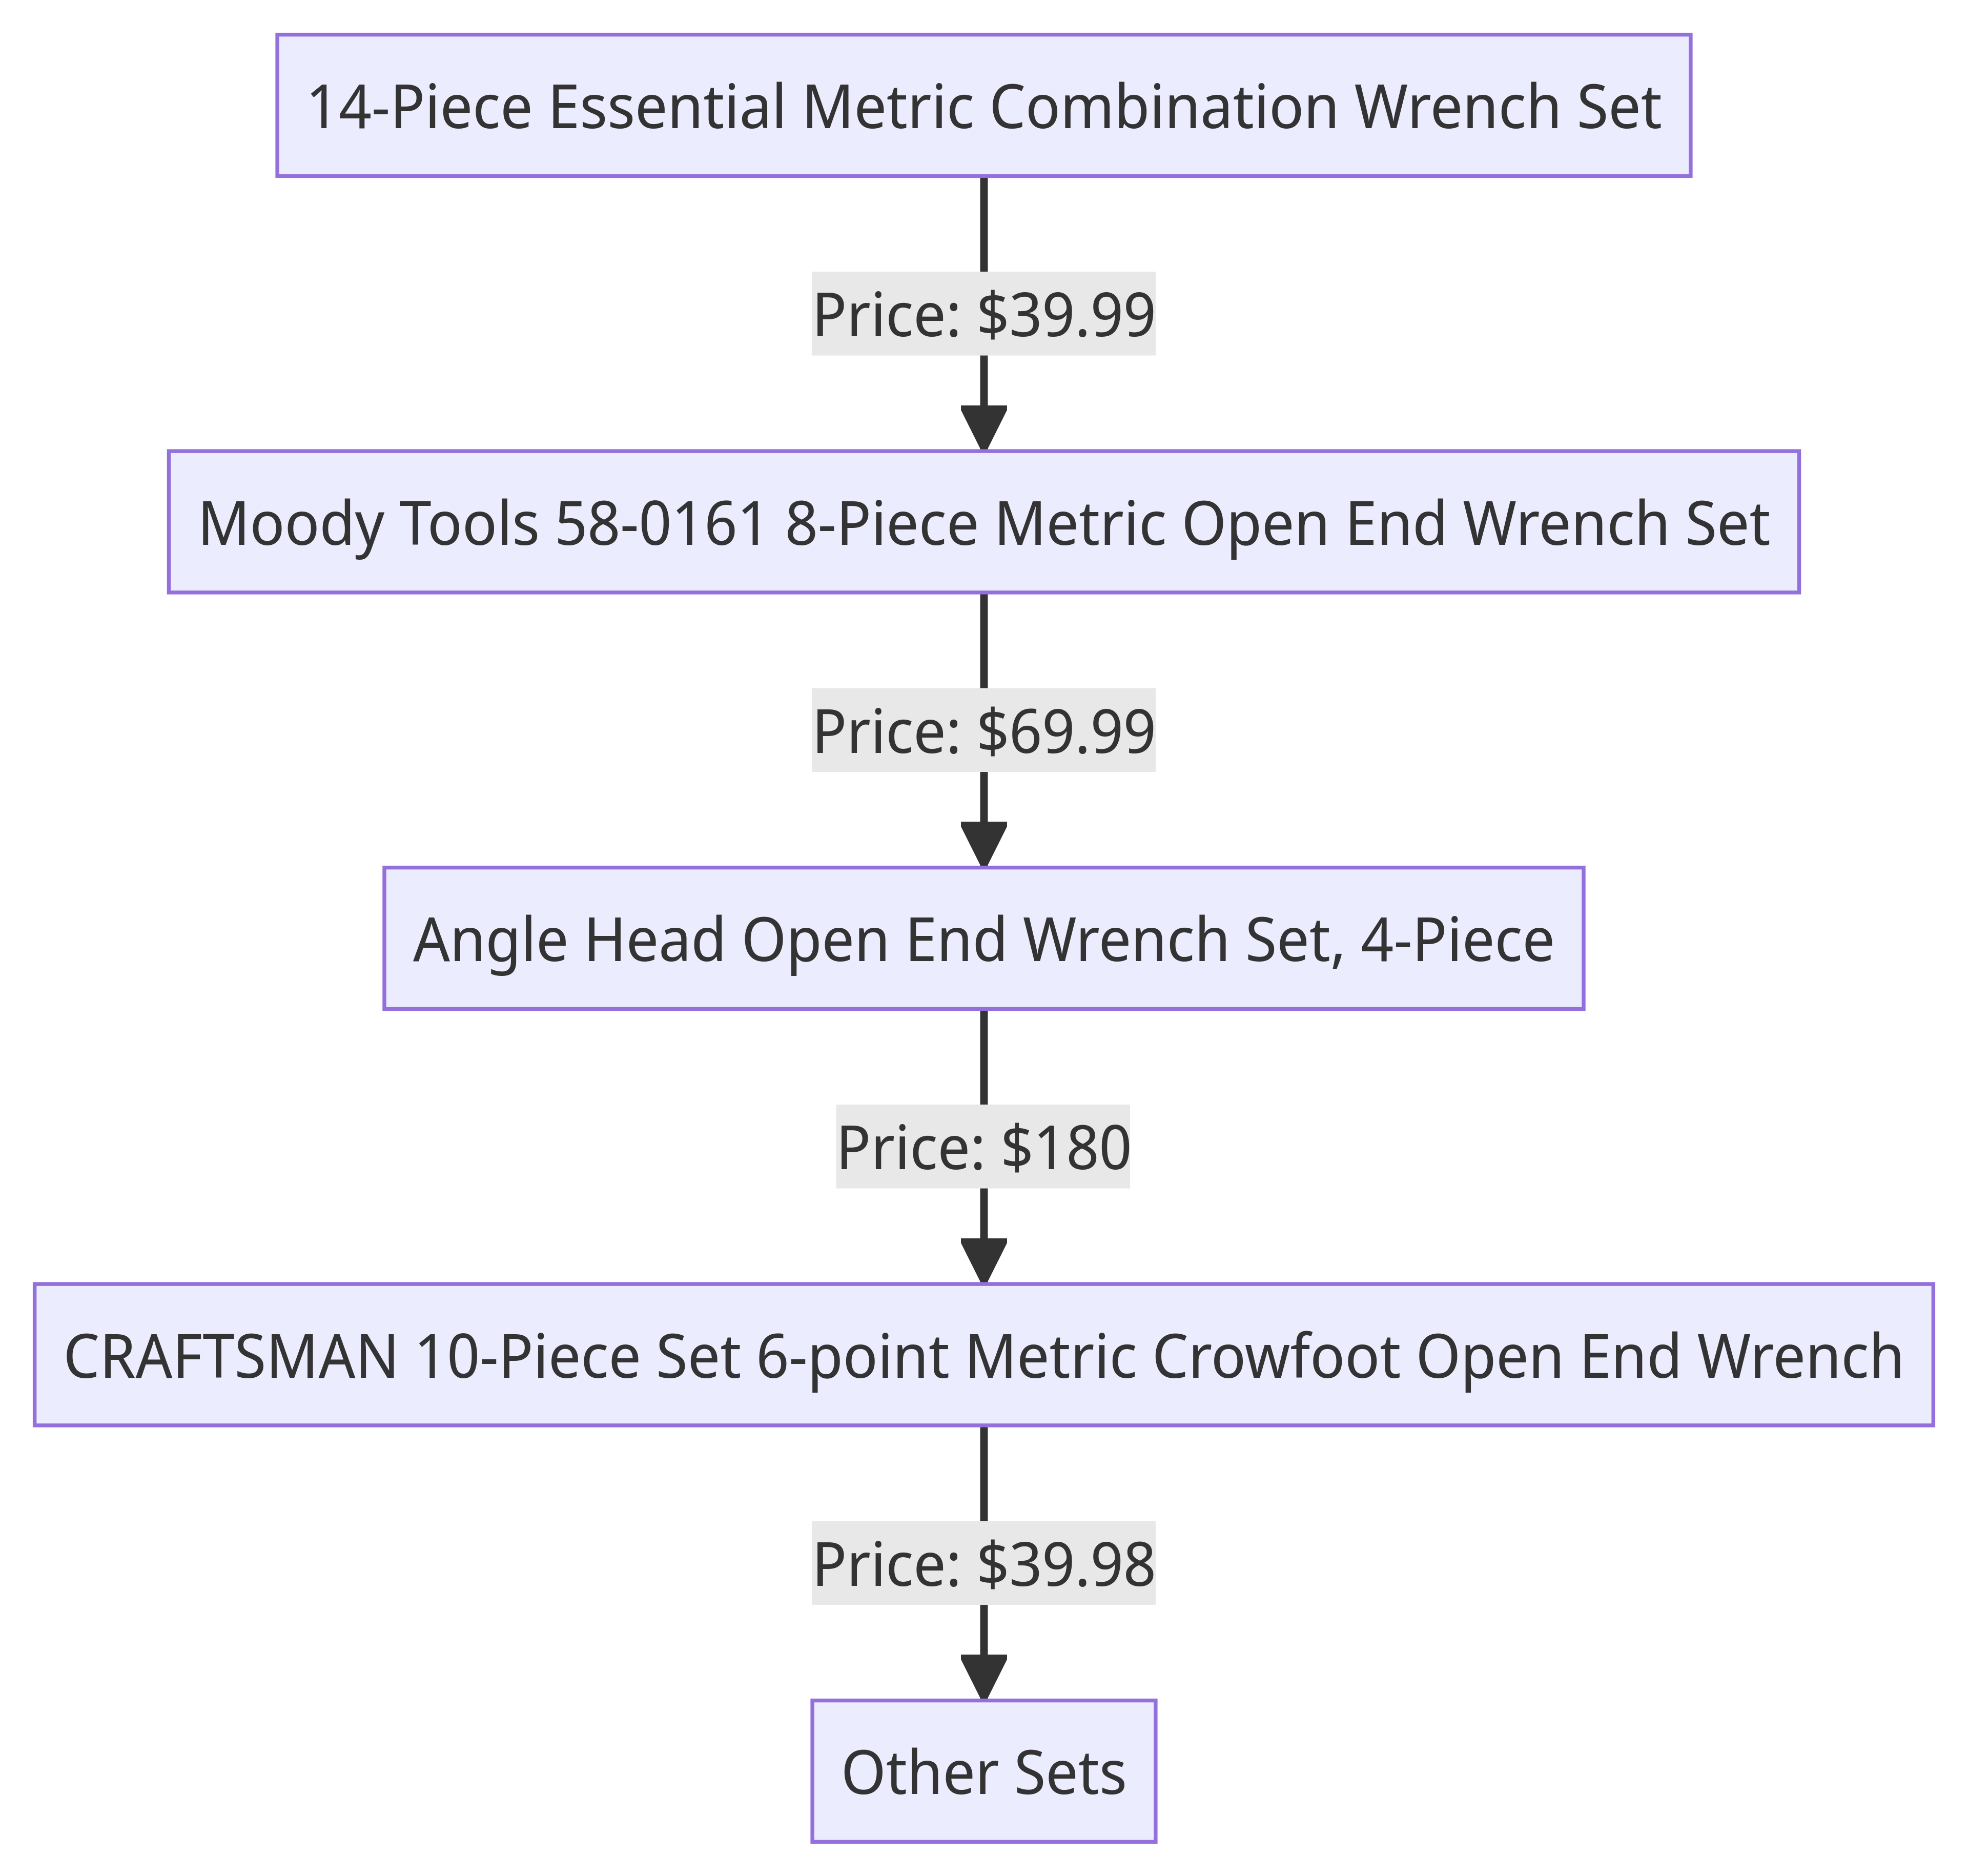 Flow Chart of Metric Open End Wrench Set Prices